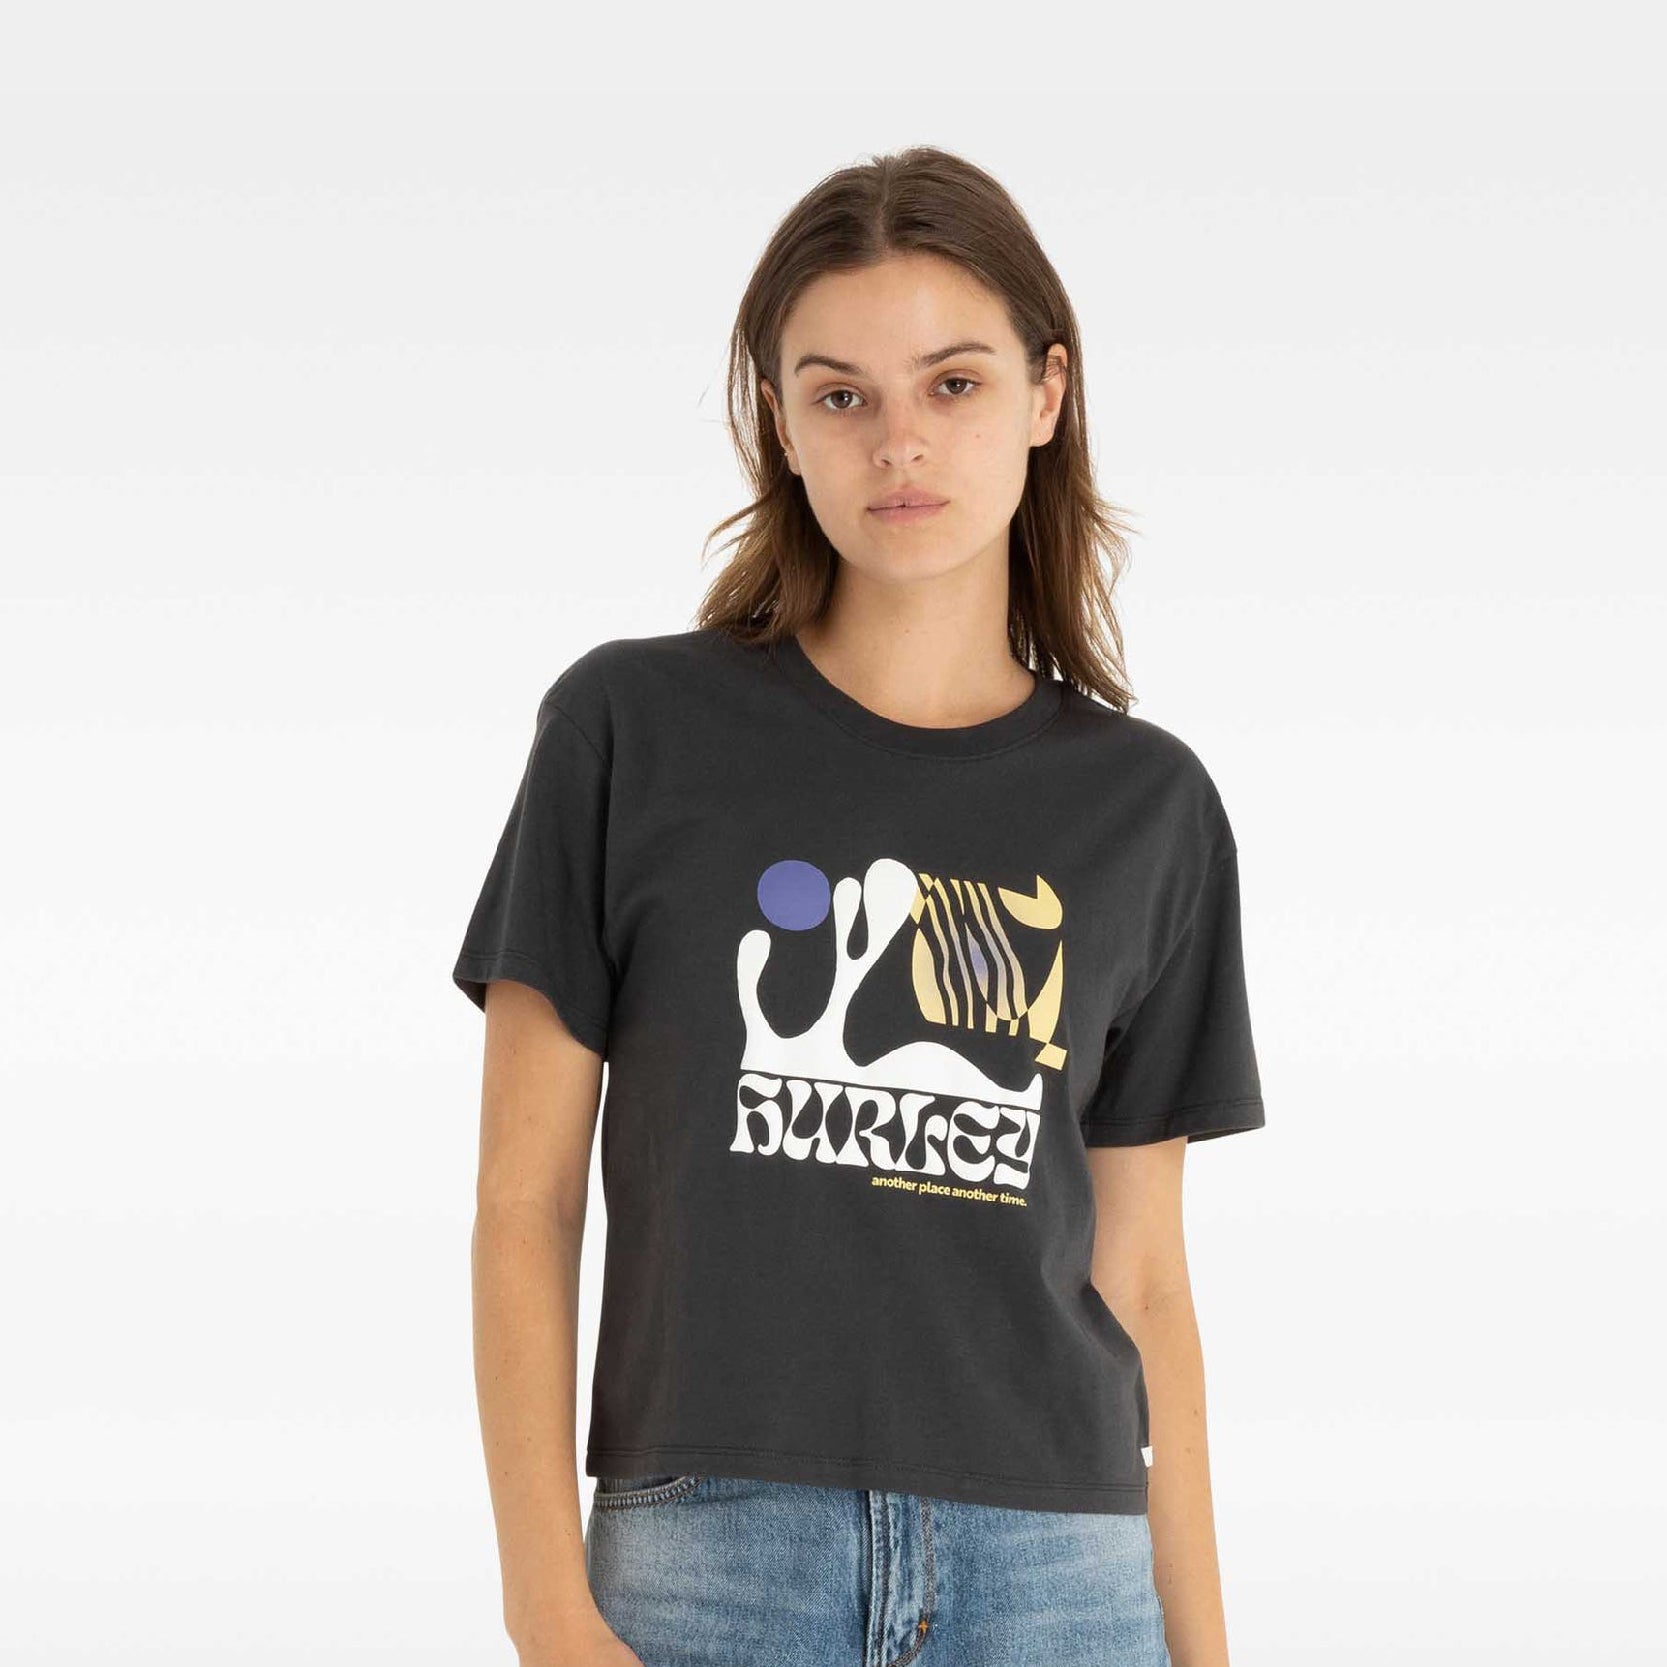 ANOTHER TIME WOMENS T-SHIRT